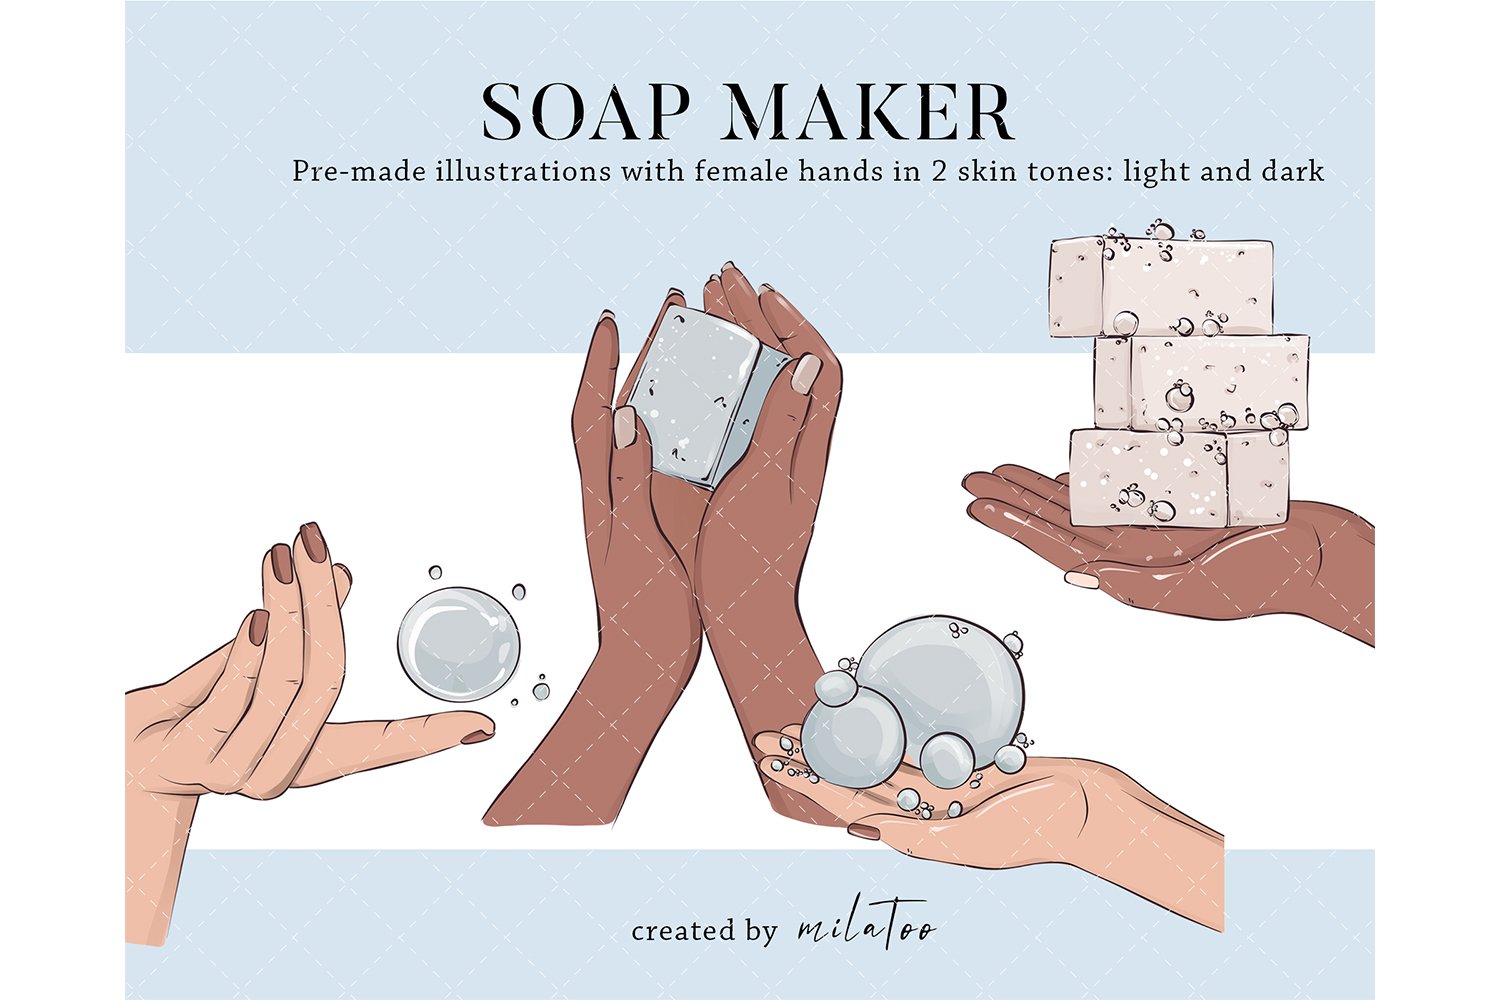 Hands with soap are different.